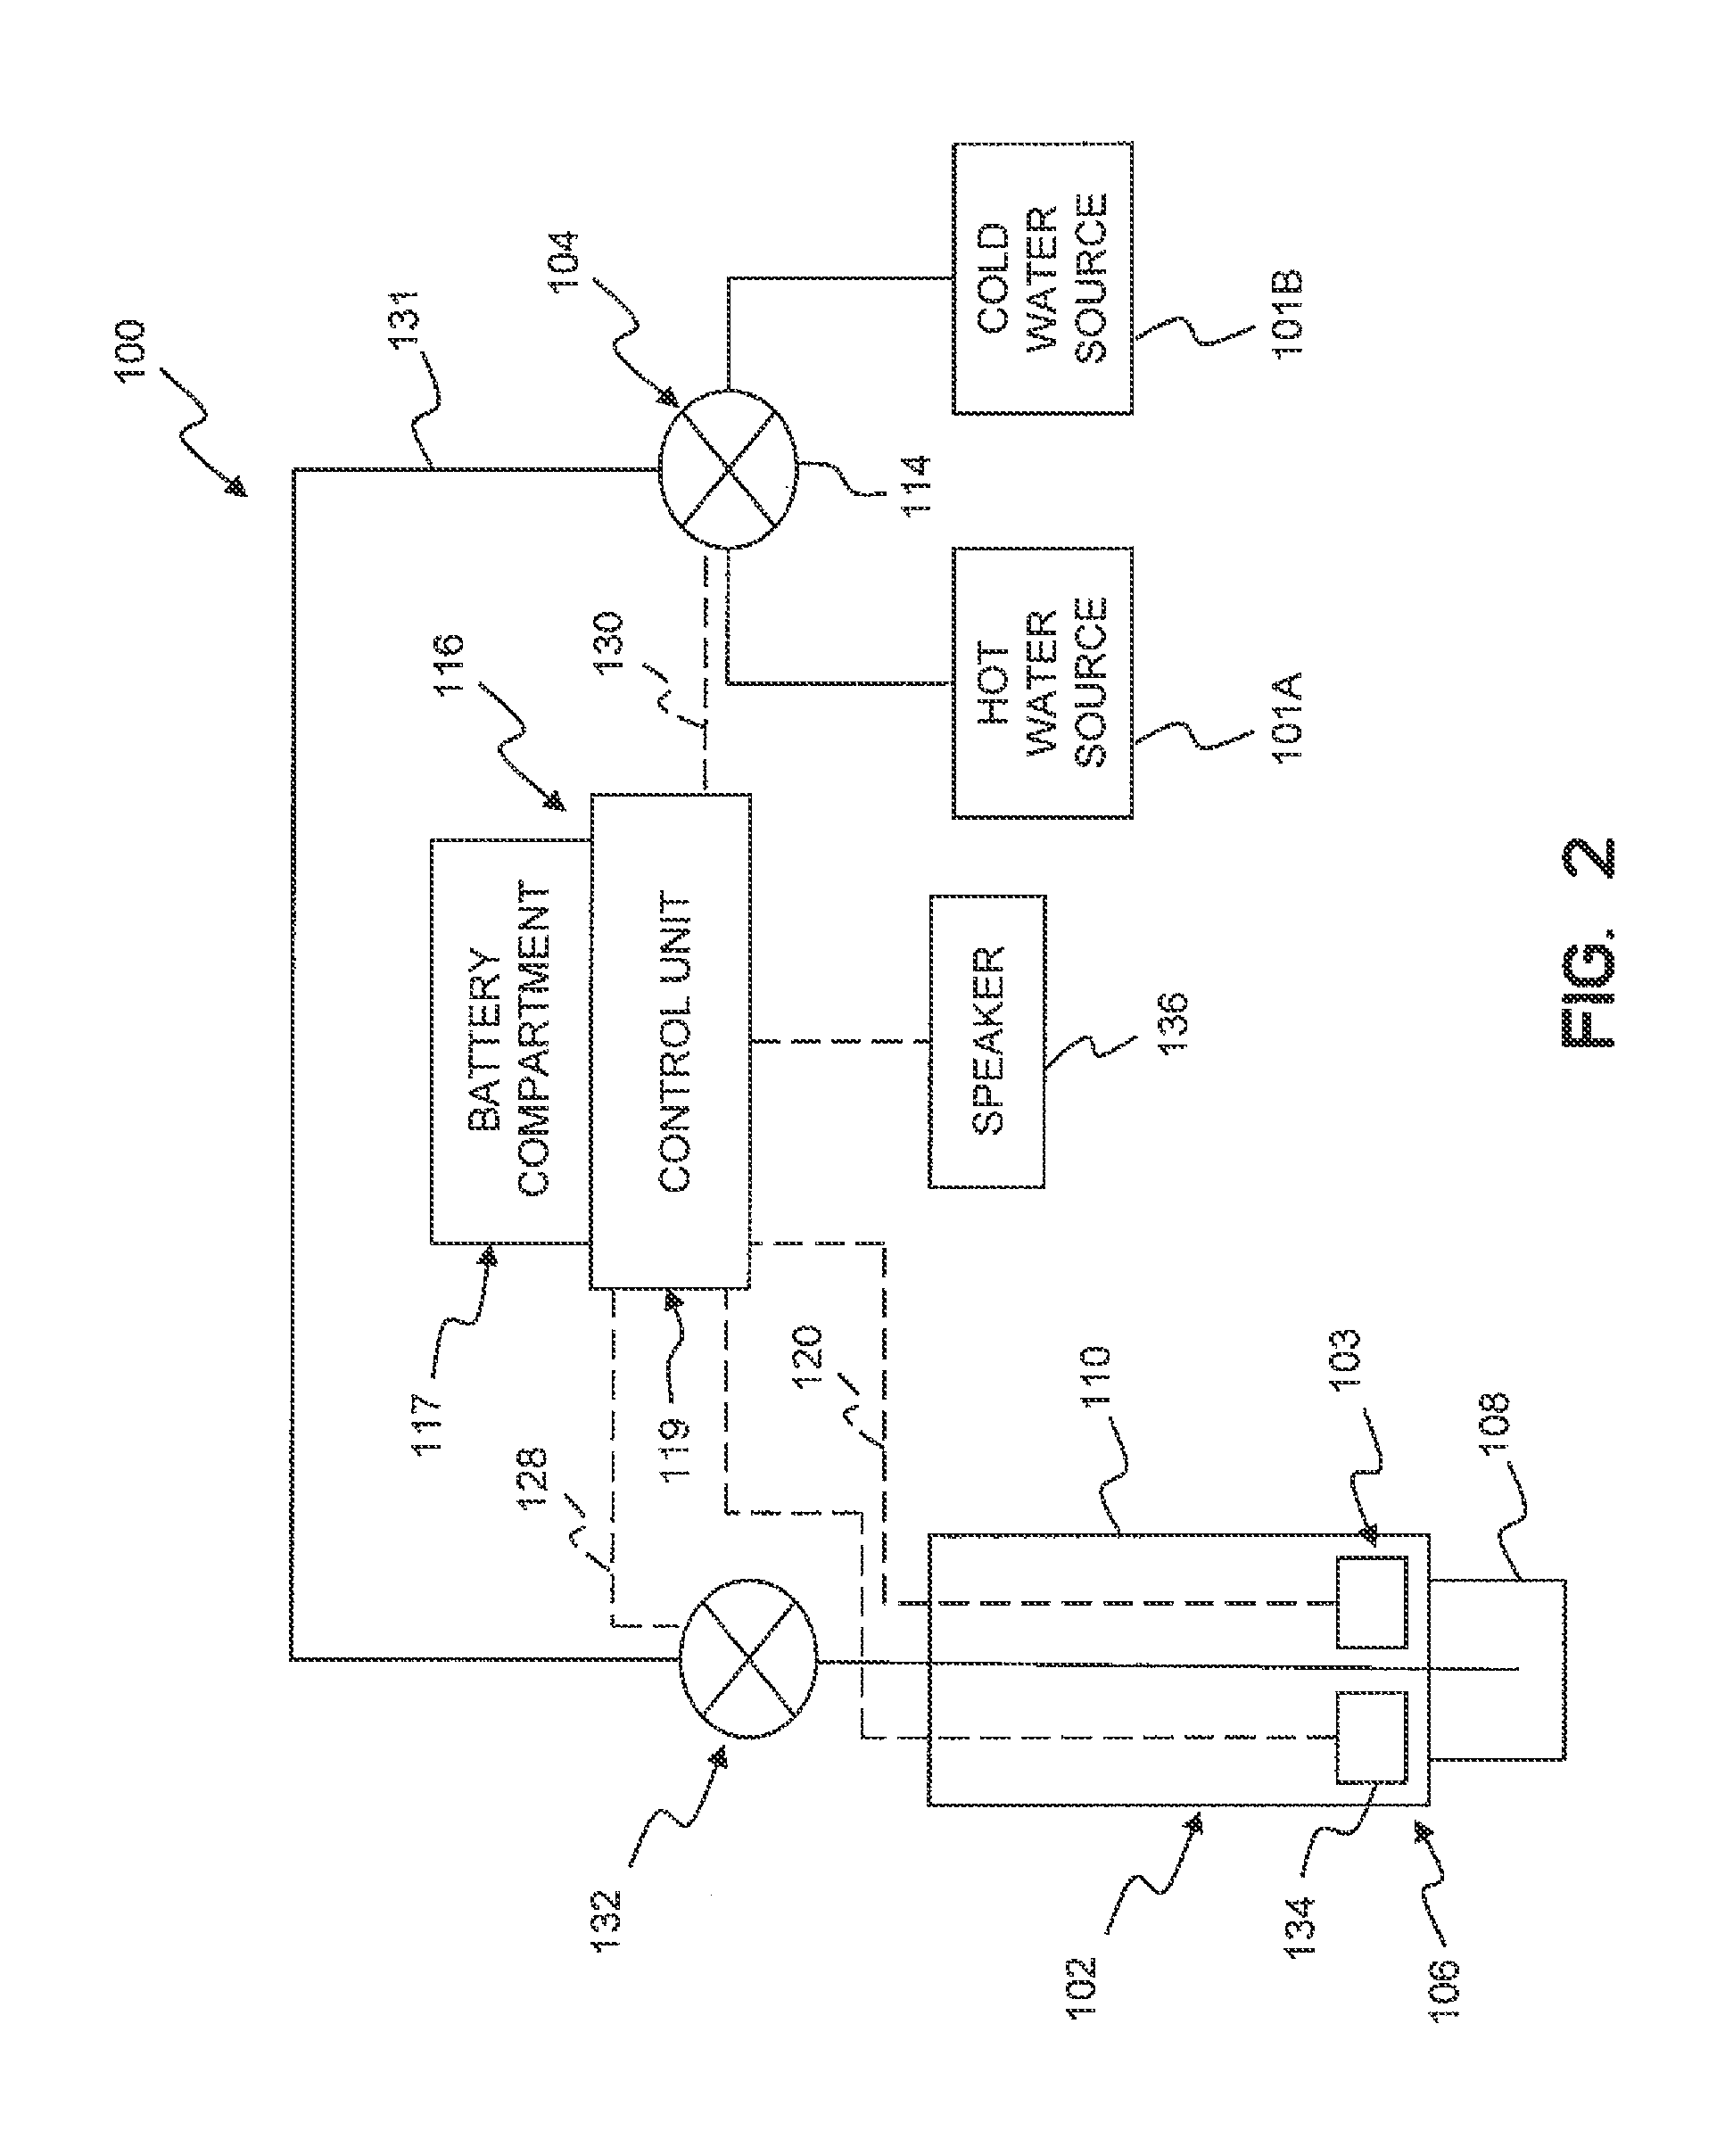 Resistive coupling for an automatic faucet